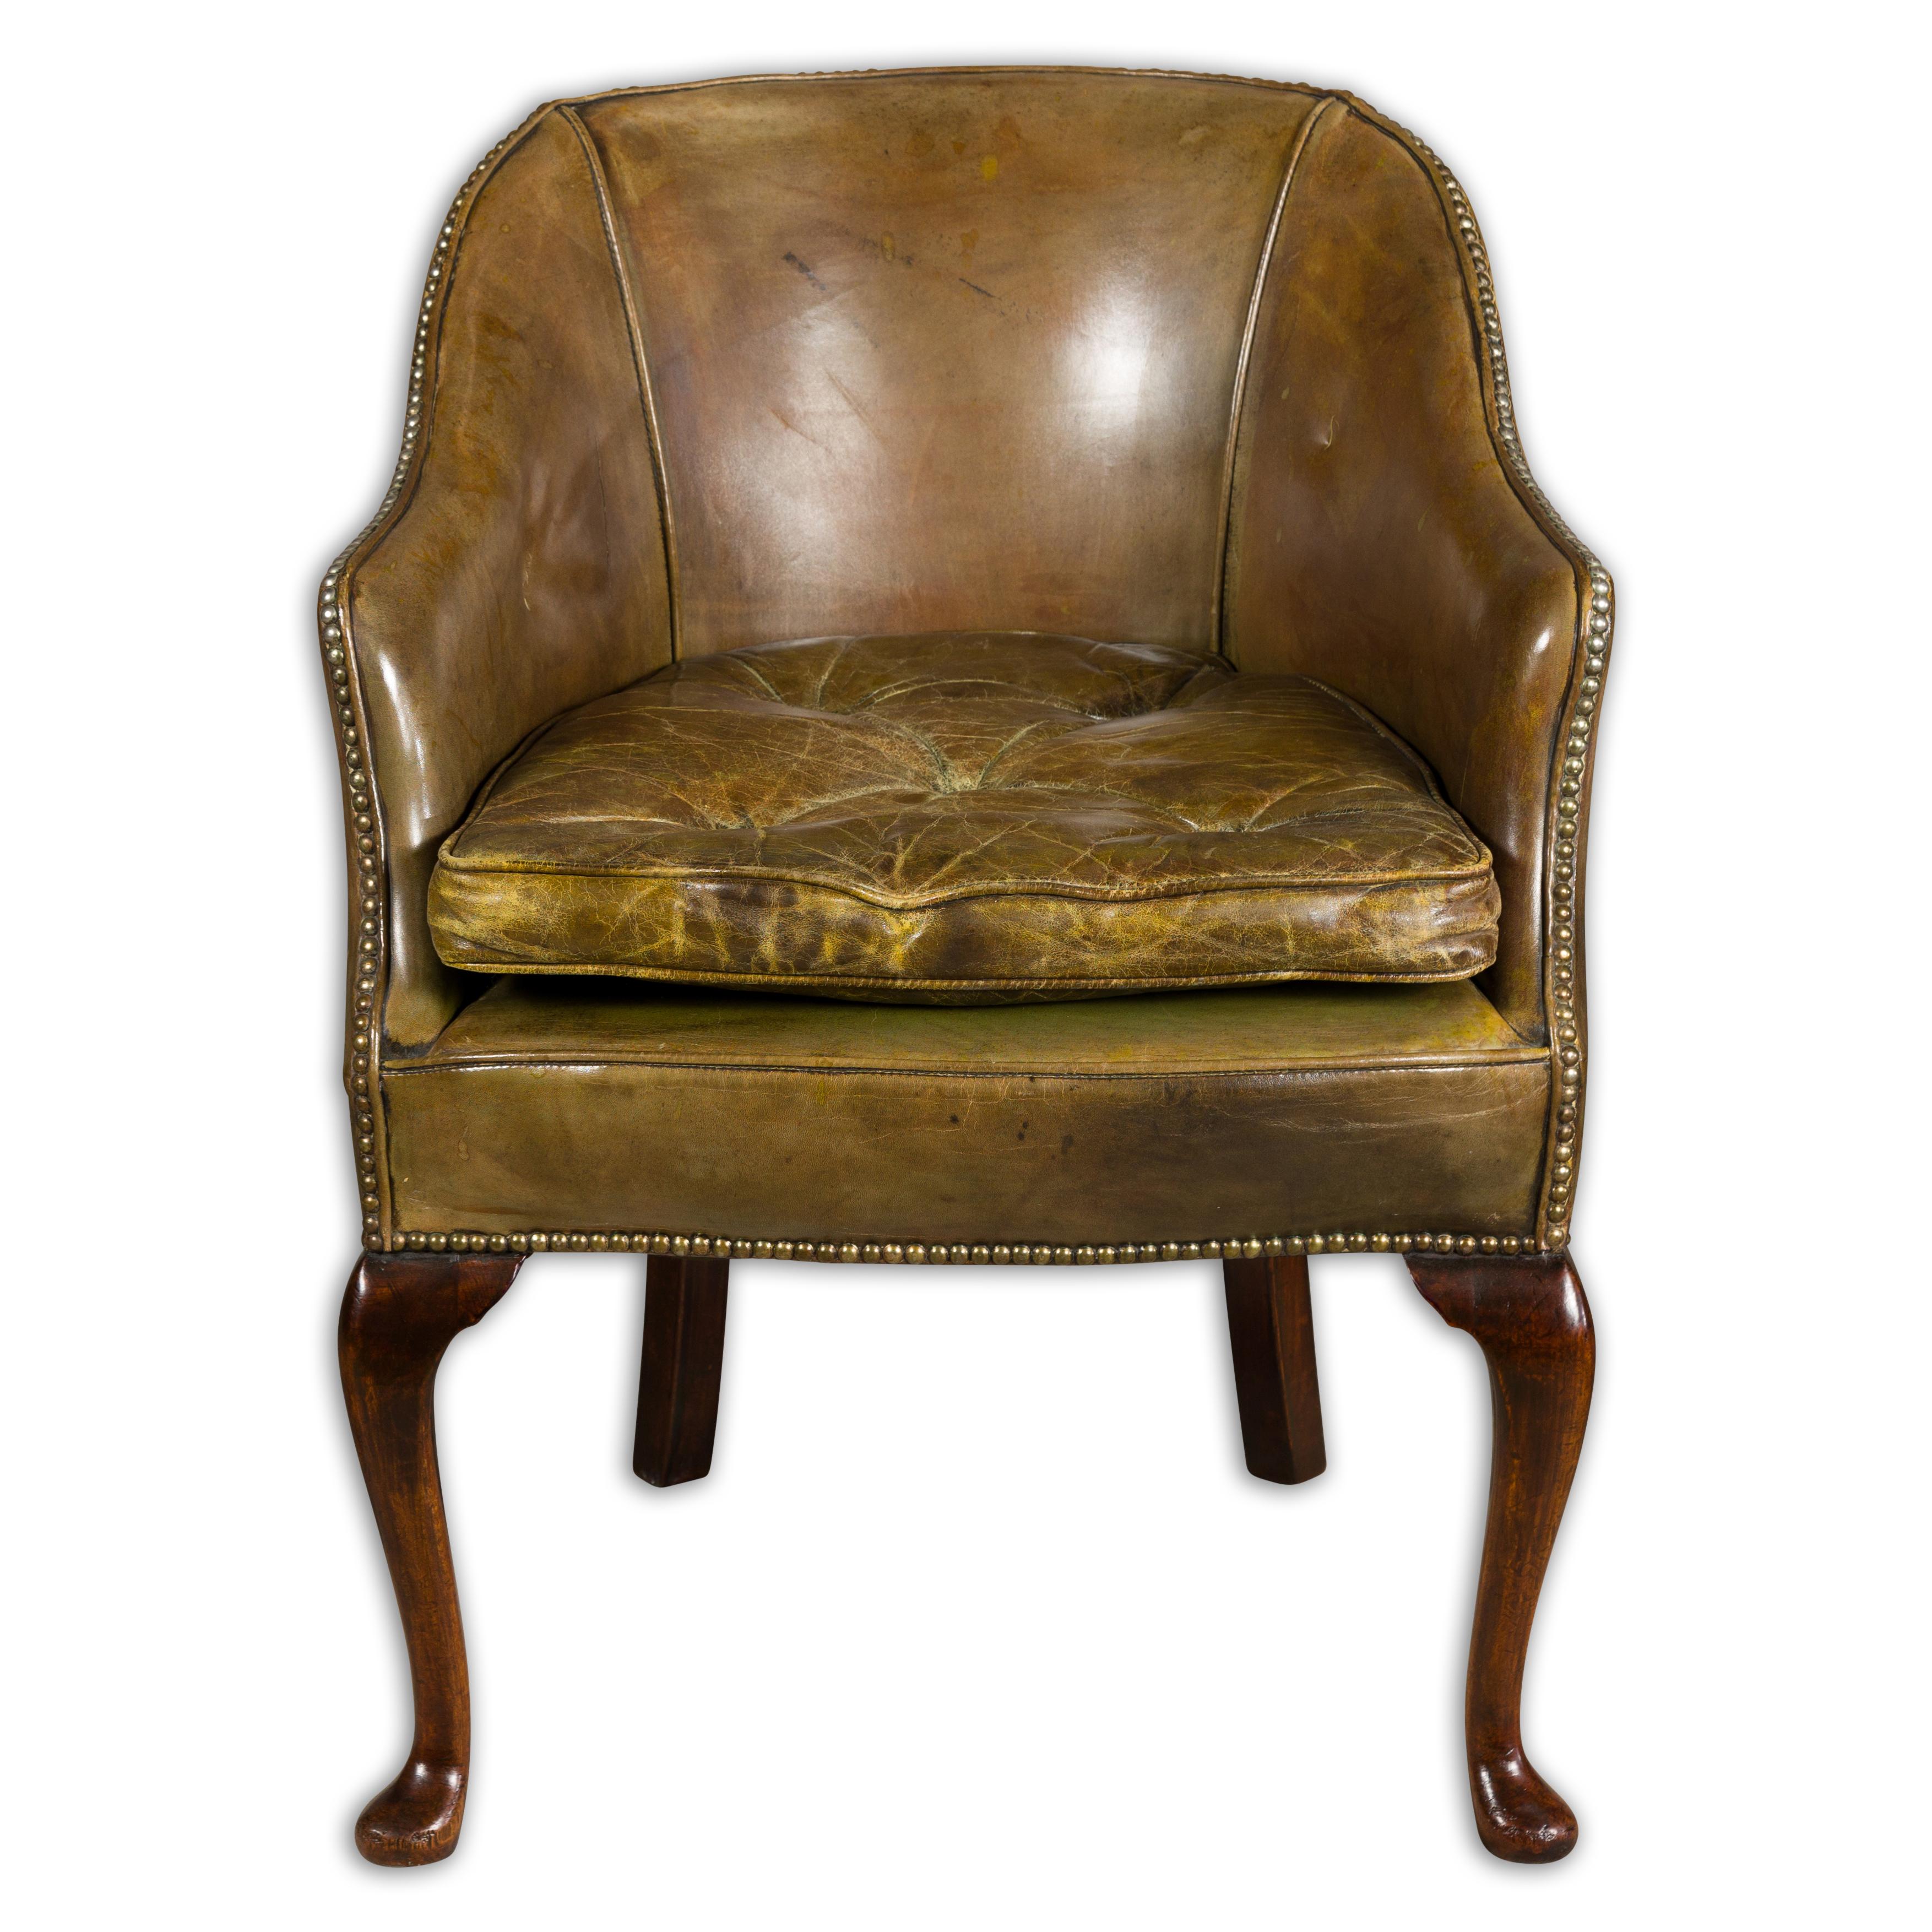 English brownish green leather chair circa 1900-1920, with carved mahogany legs. Step back in time with this English brownish green leather chair, hailing from the early 20th century (circa 1900-1920). This sophisticated piece is a wonderful